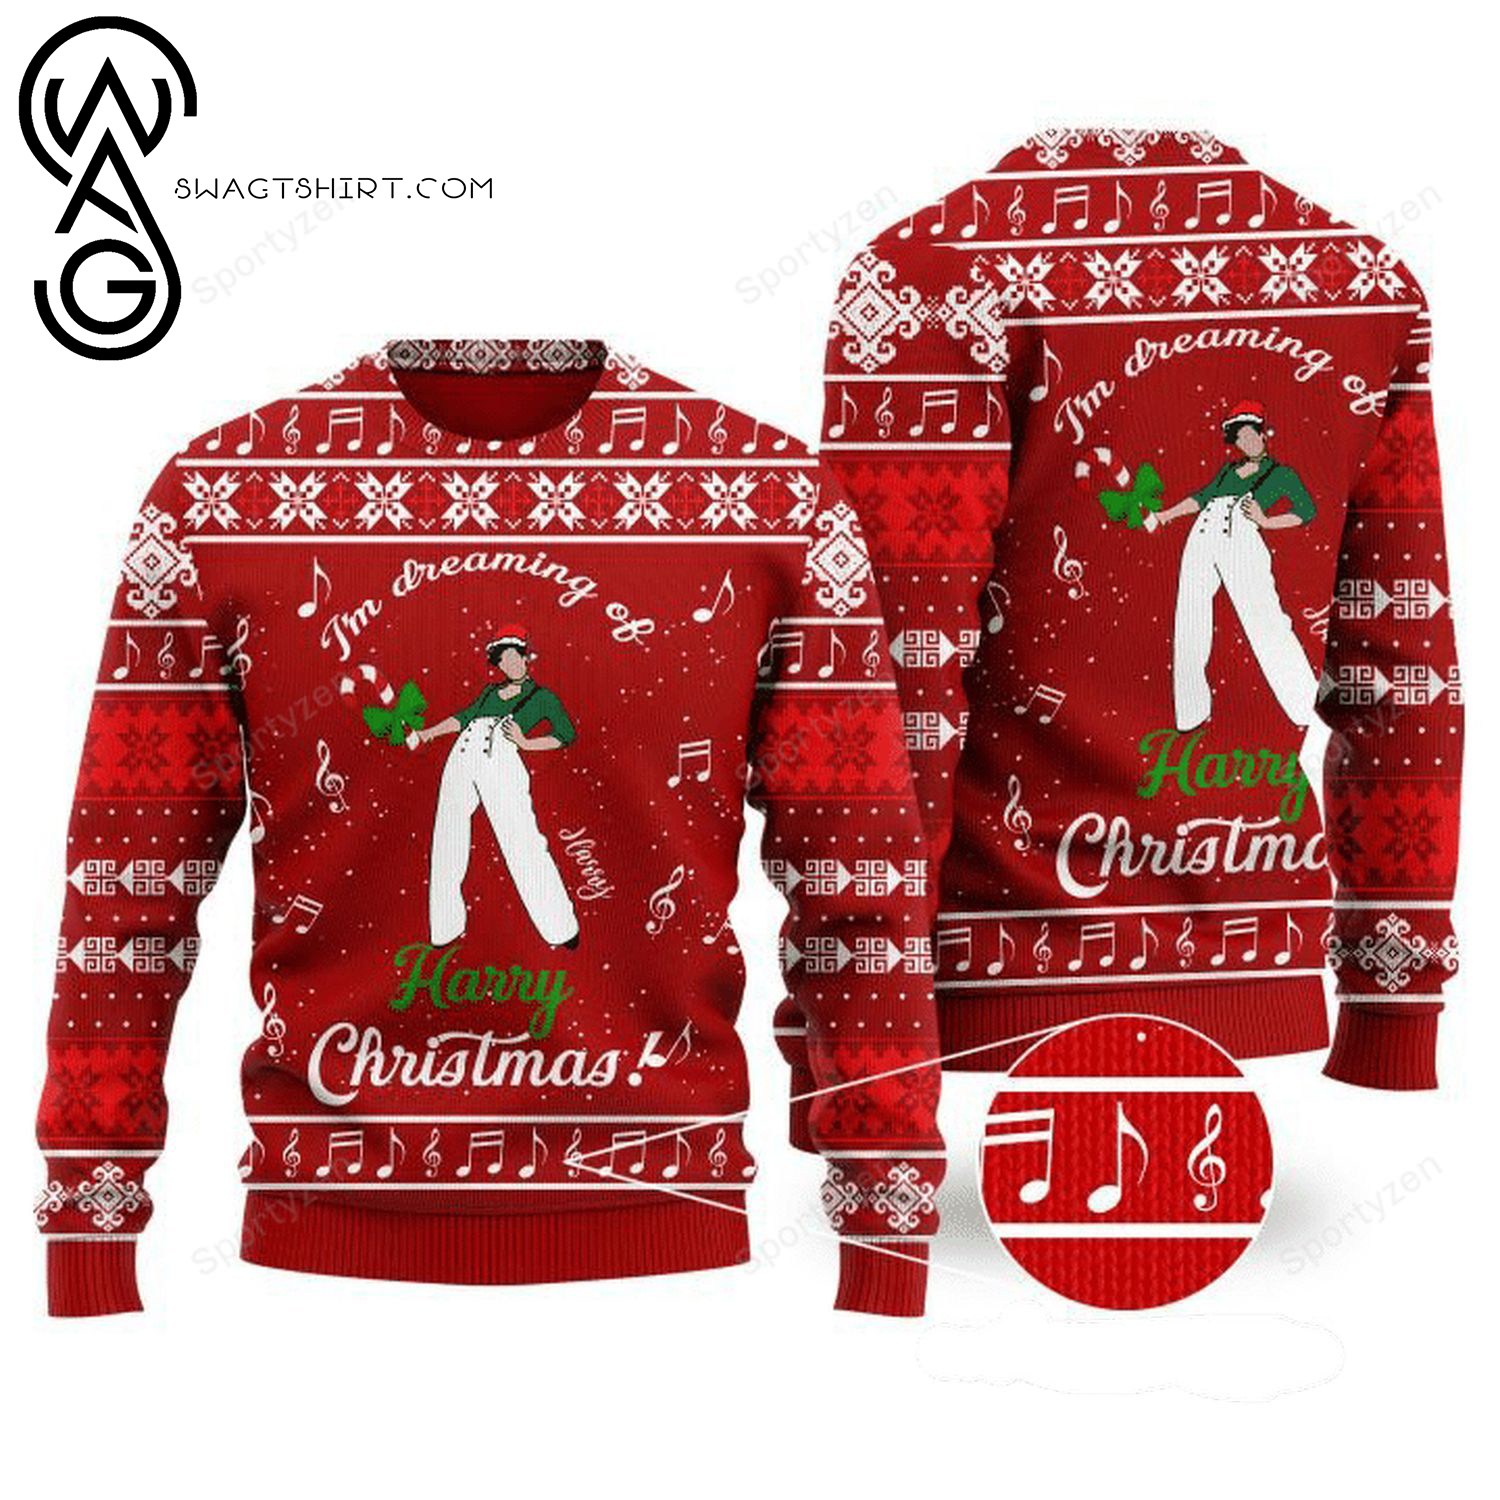 I'm Dreaming of Harry Christmas Full Print Ugly Christmas Sweater